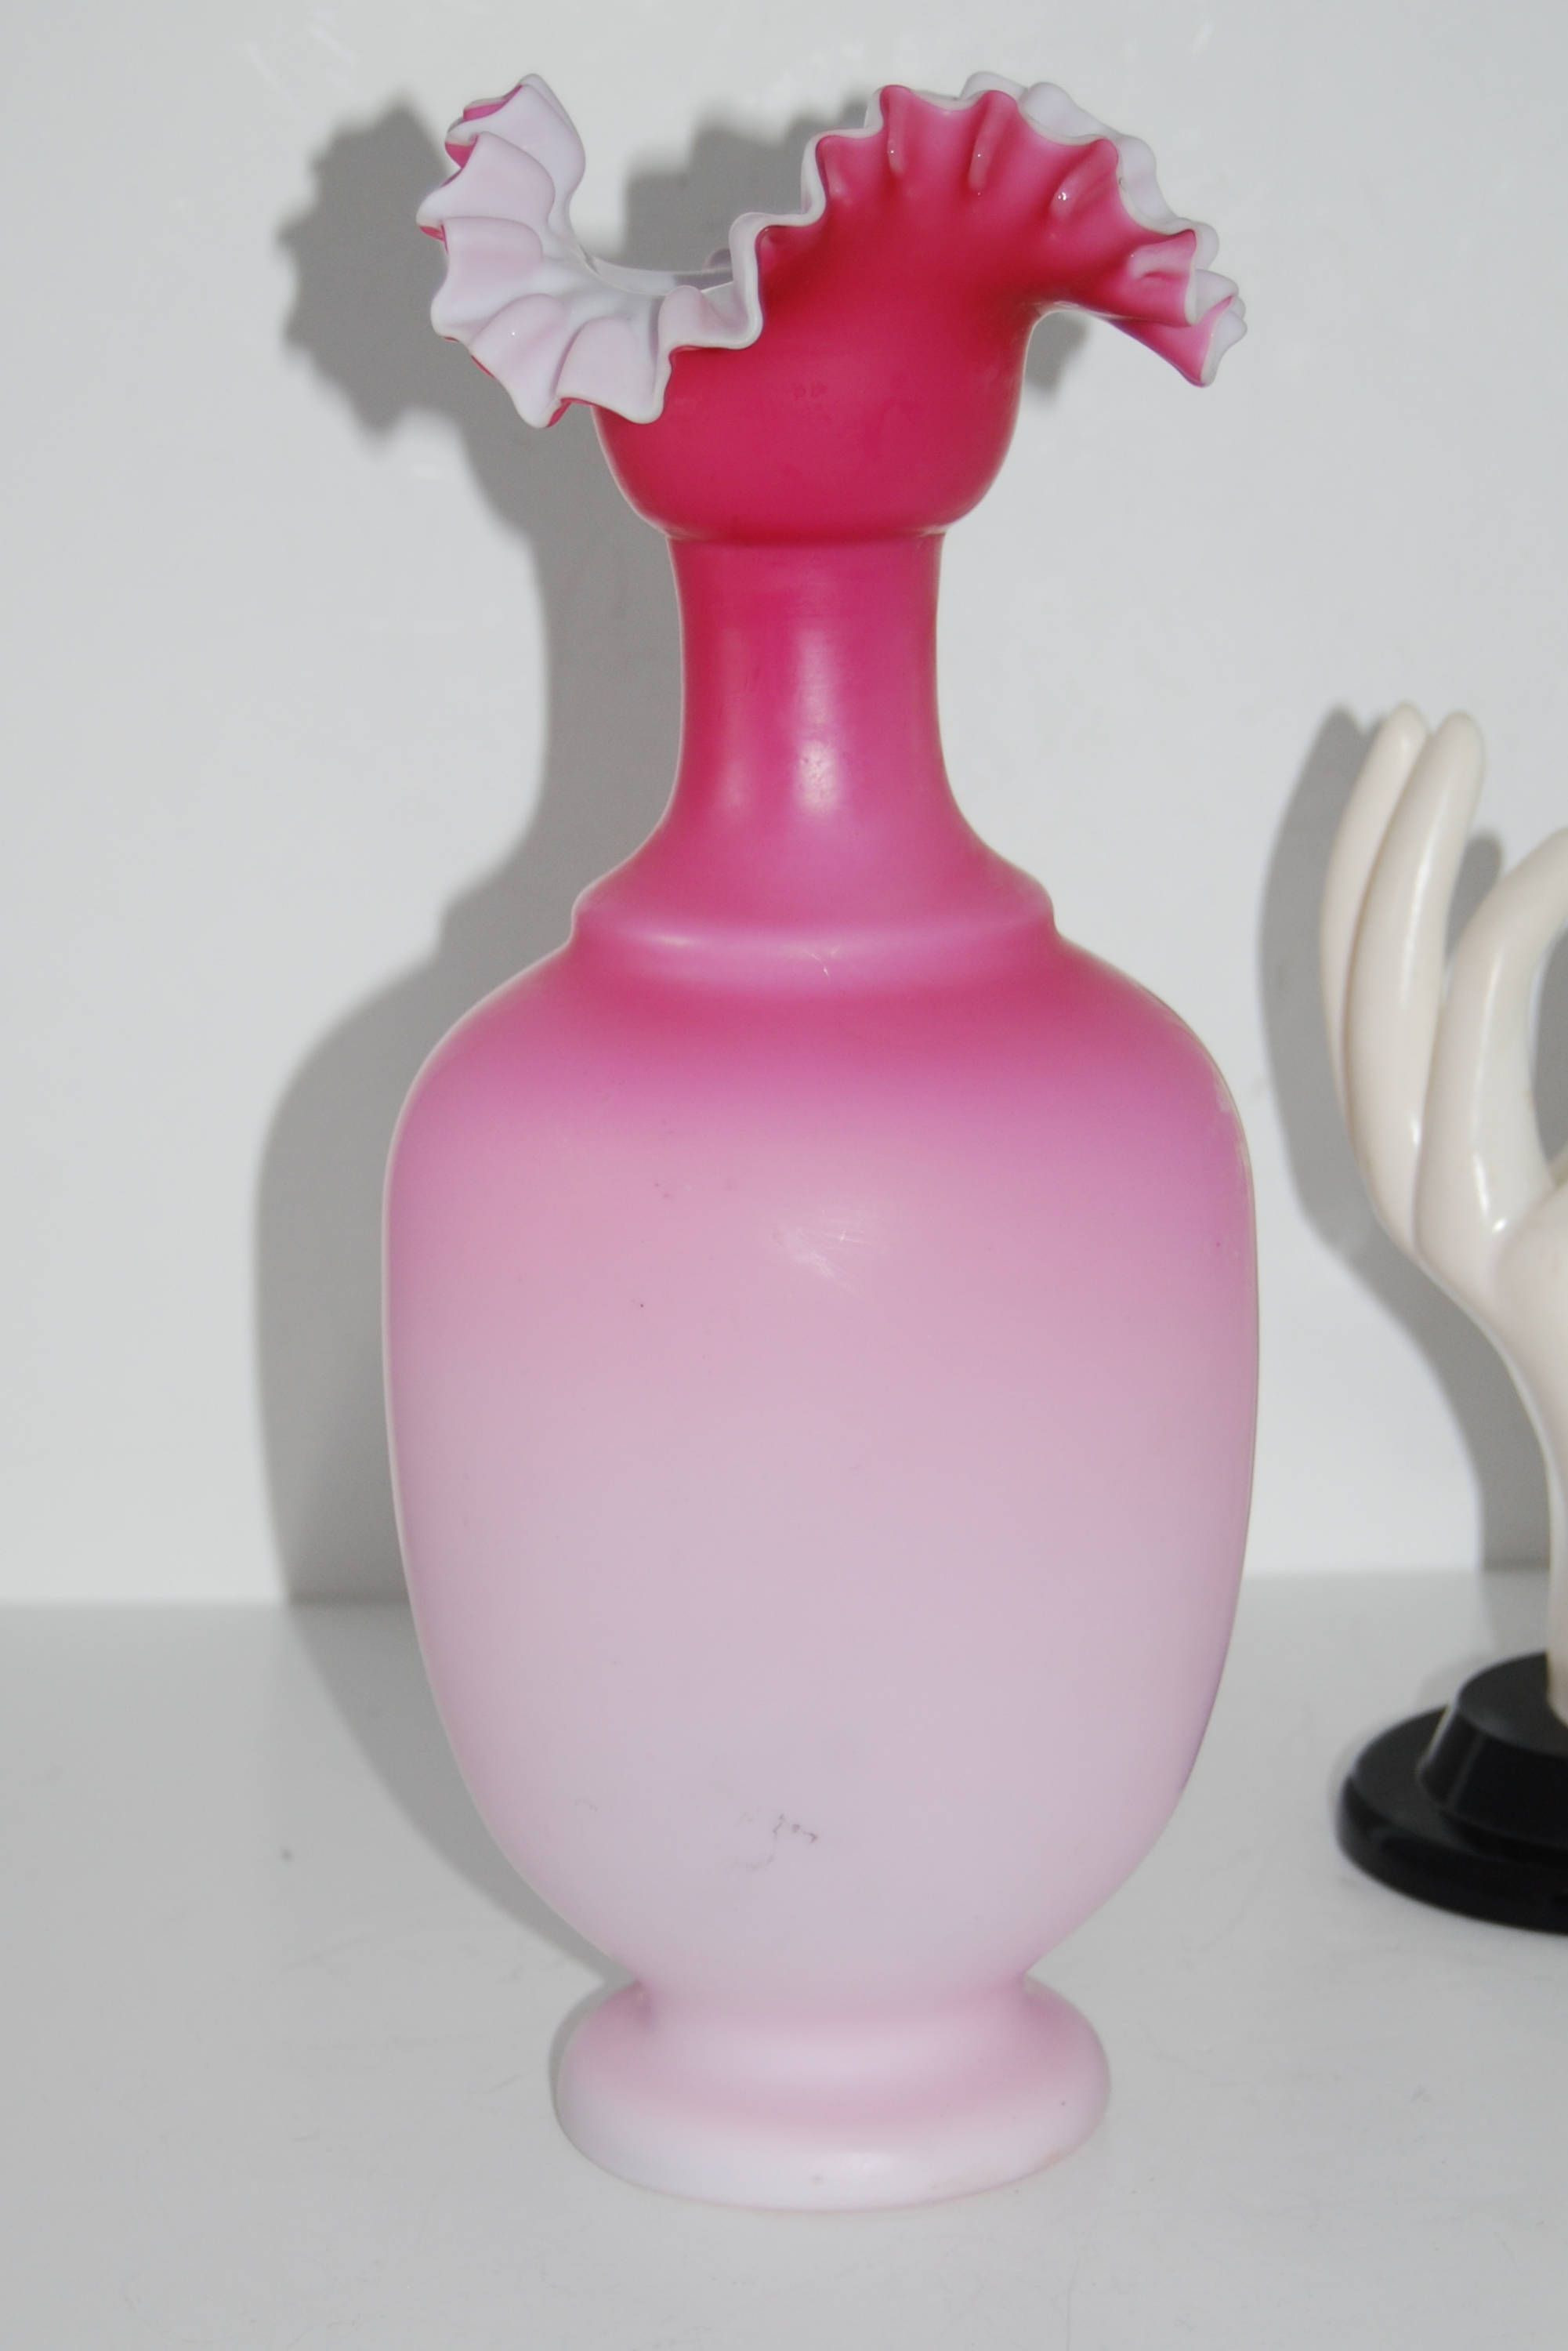 13 Wonderful Pink Bubble Glass Vase 2024 free download pink bubble glass vase of antique victorian glass vase pink white satin cased tall 11 25 throughout antique victorian glass vase pink white satin cased tall 11 25 pontil mark by savesitall o